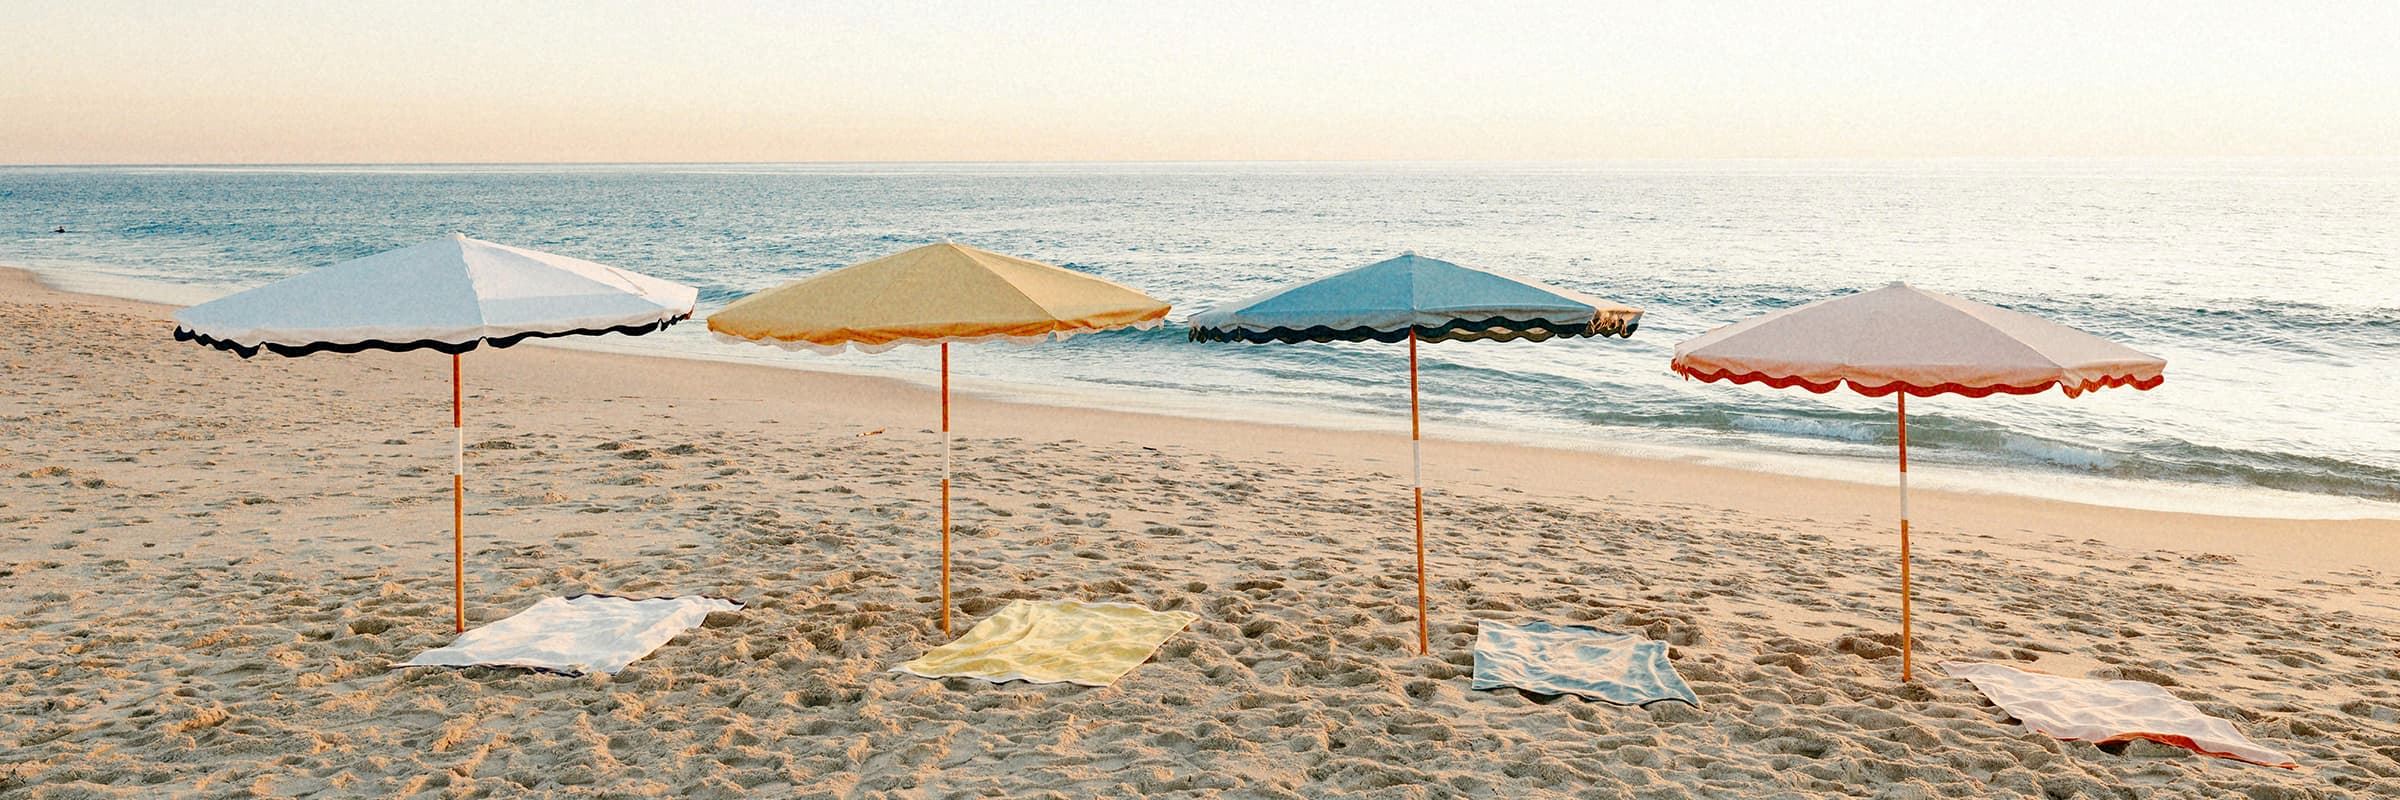 four colorful beach umbrellas on the sand with beach towels under them